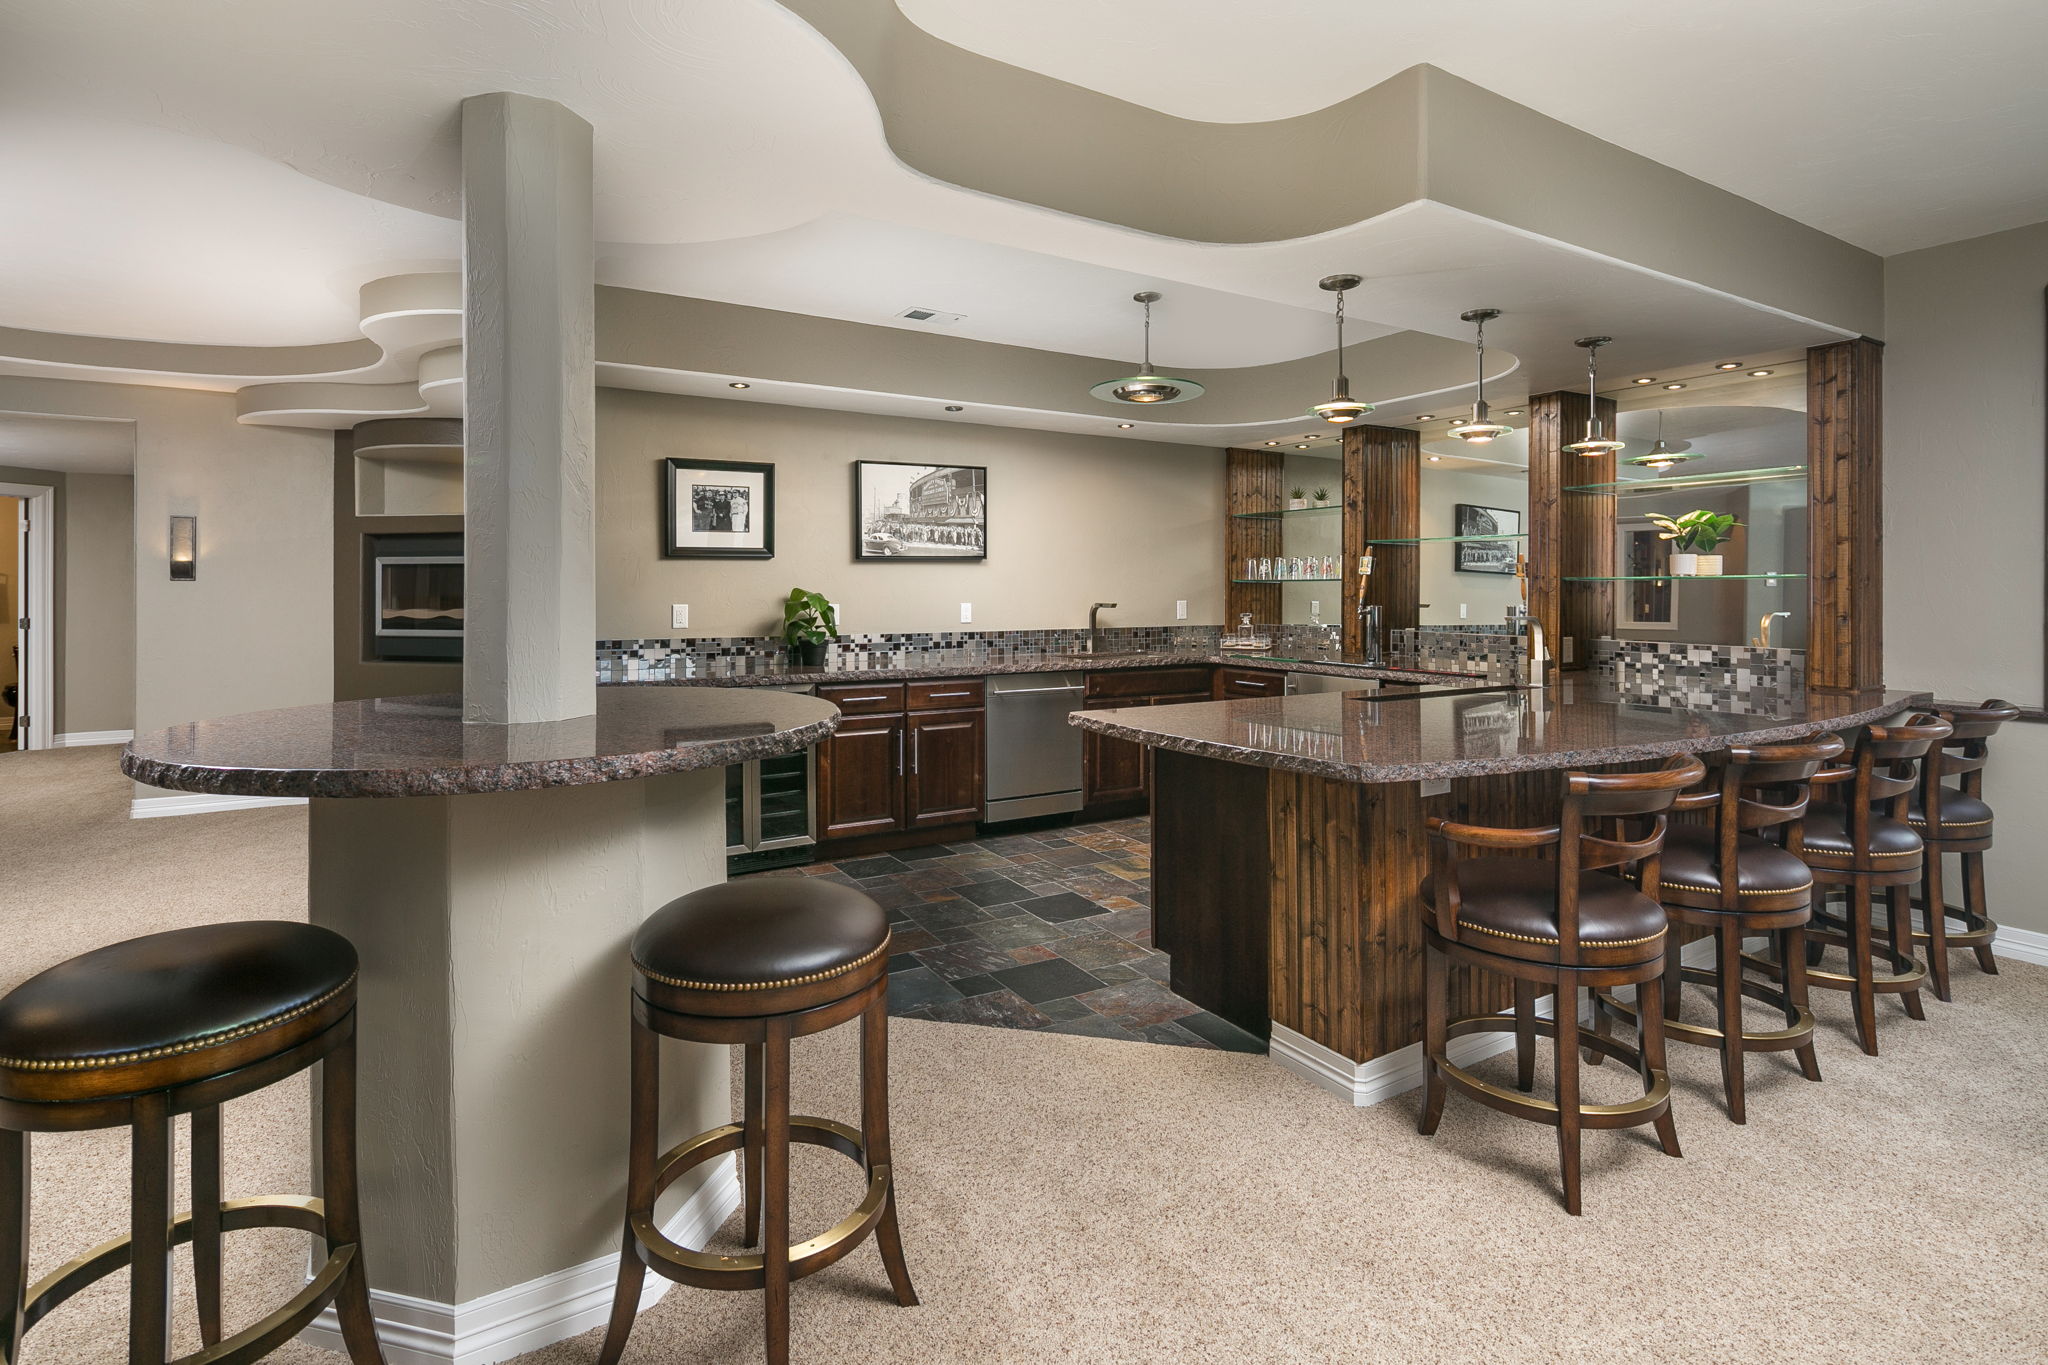 You Have to See This Basement Wet Bar to Believe It